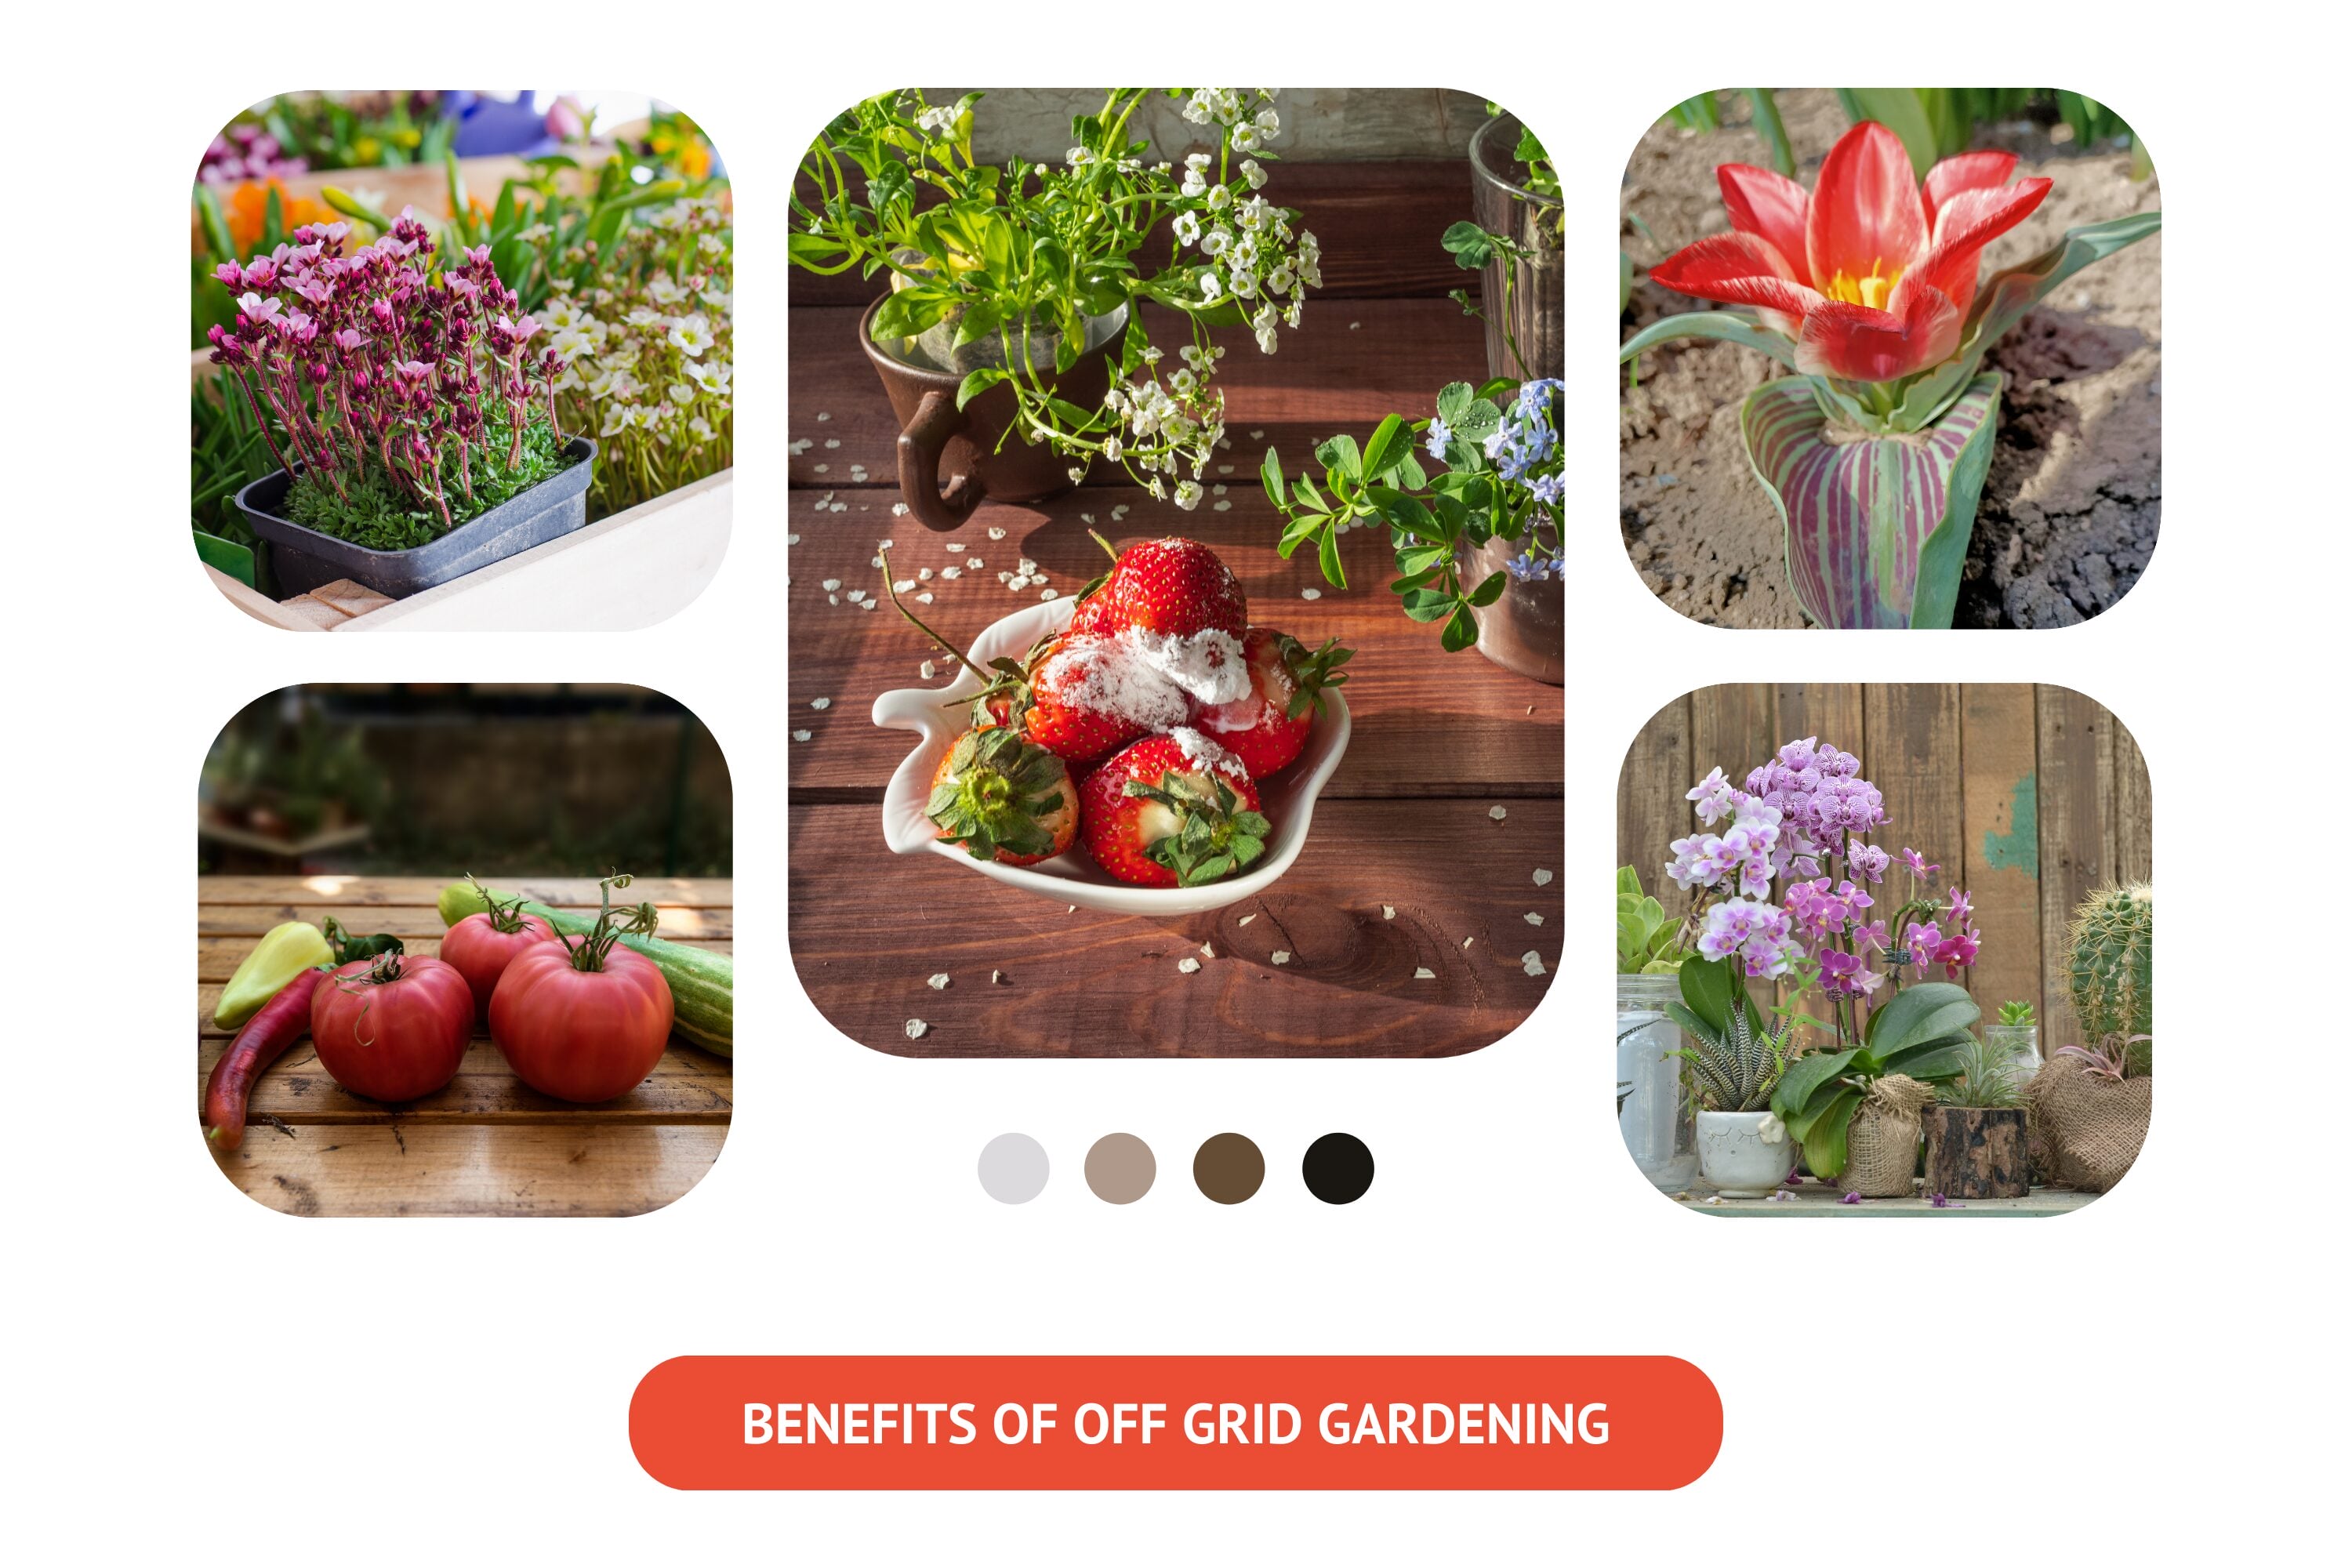 The advantages of off-grid gardening are numerous.